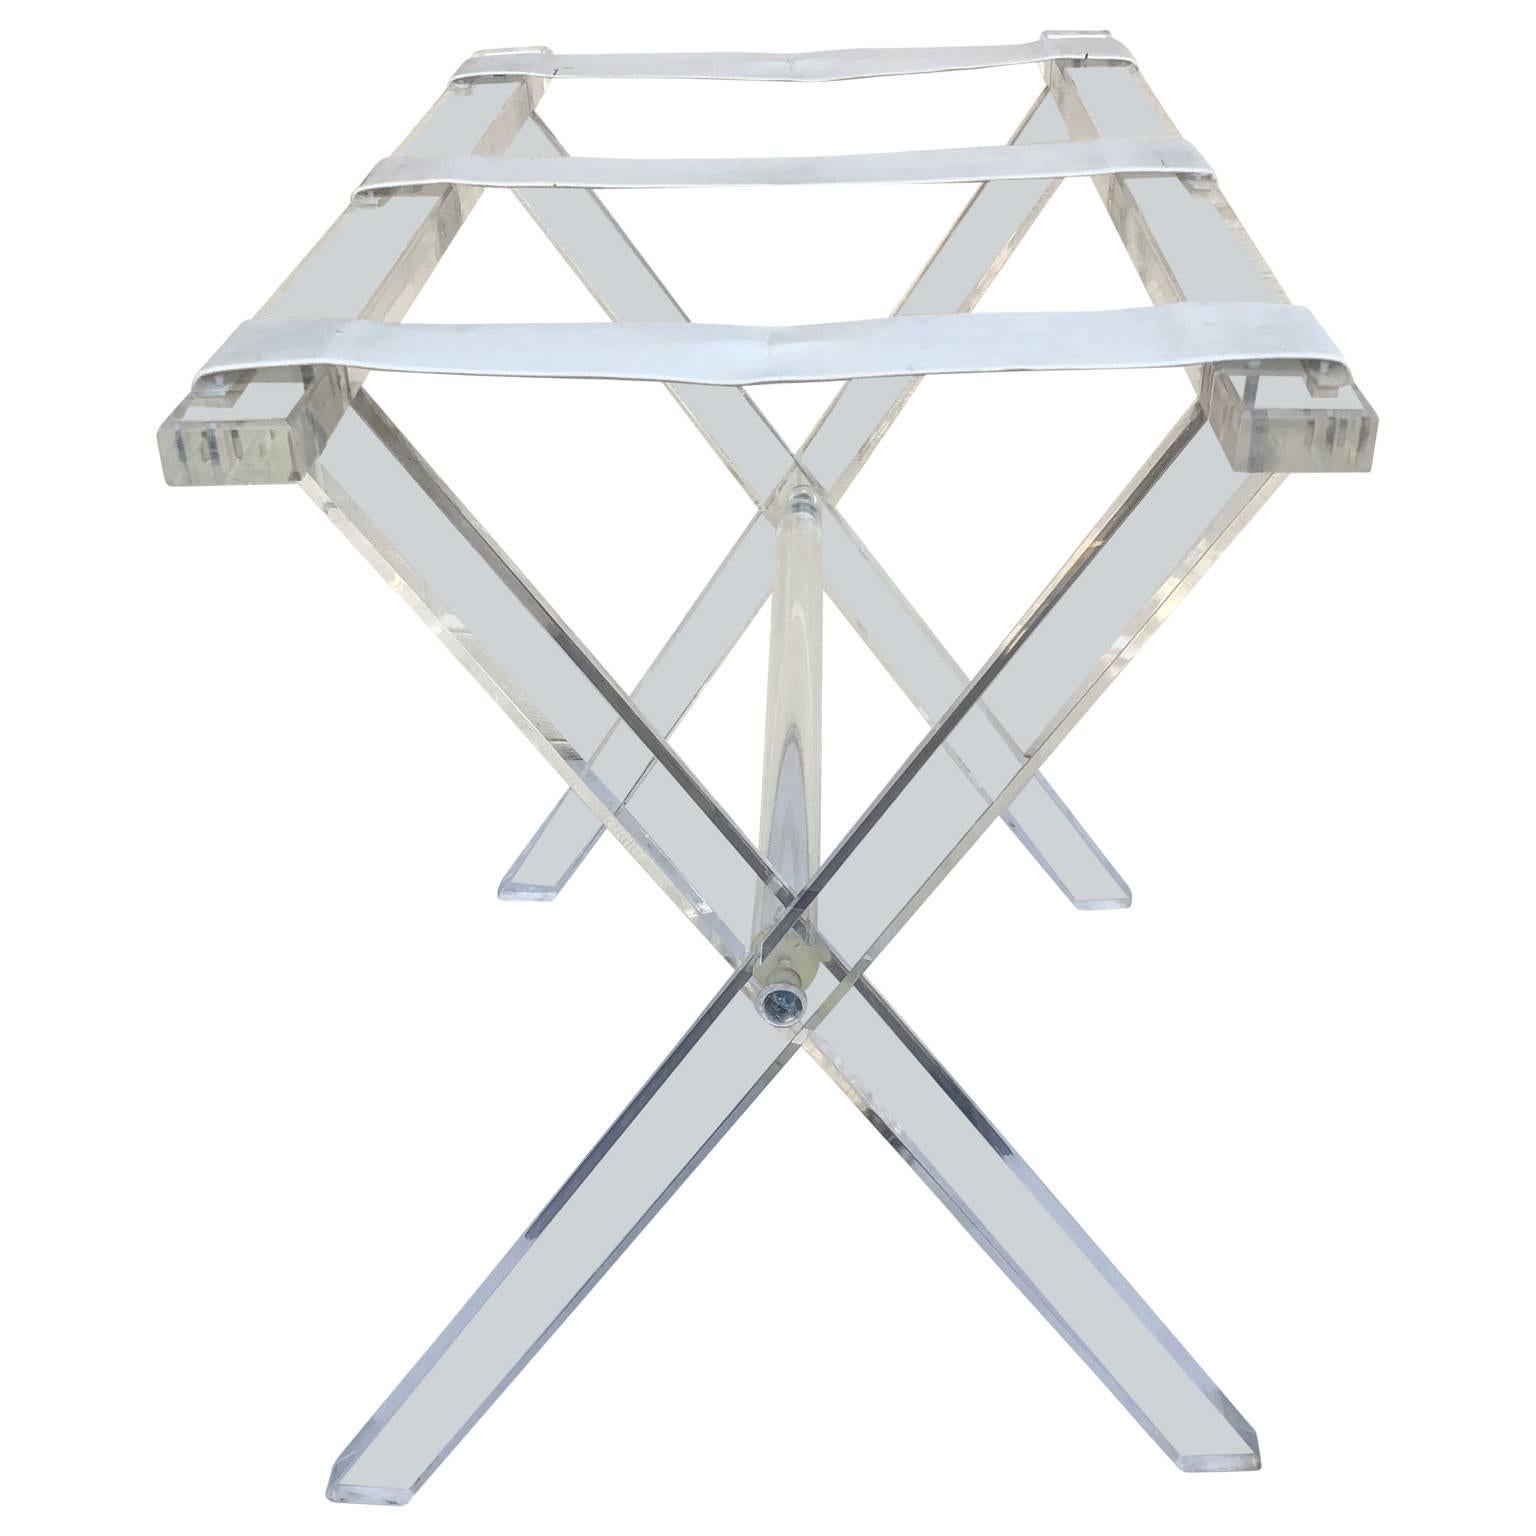 Vintage Hollywood Regency Lucite tray table or luggage rack, signed Scheibe.